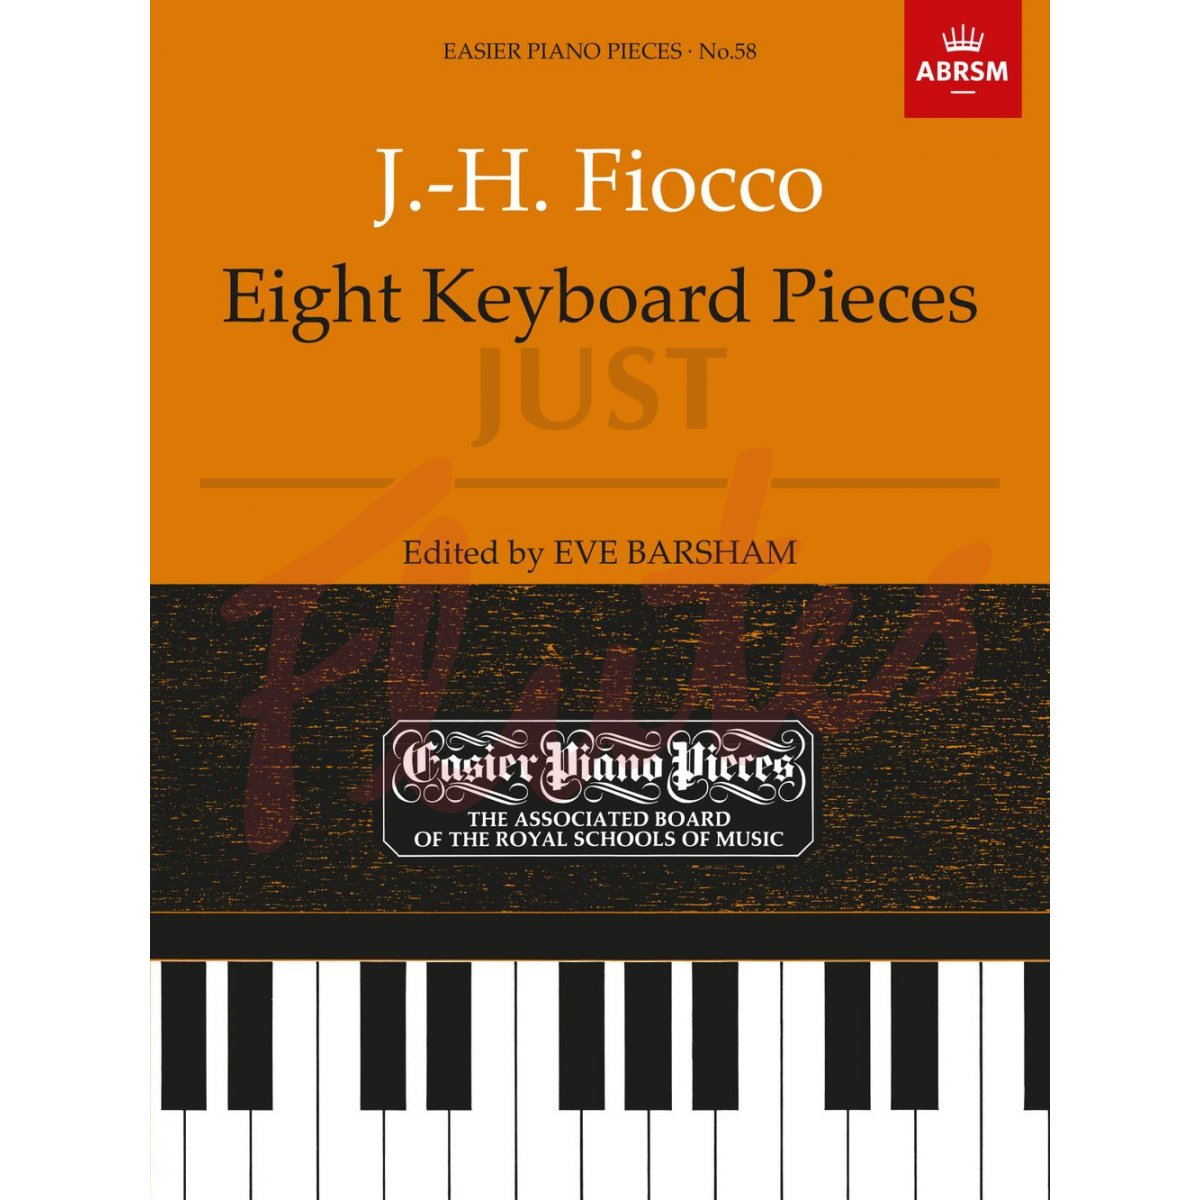 Eight Keyboard Pieces